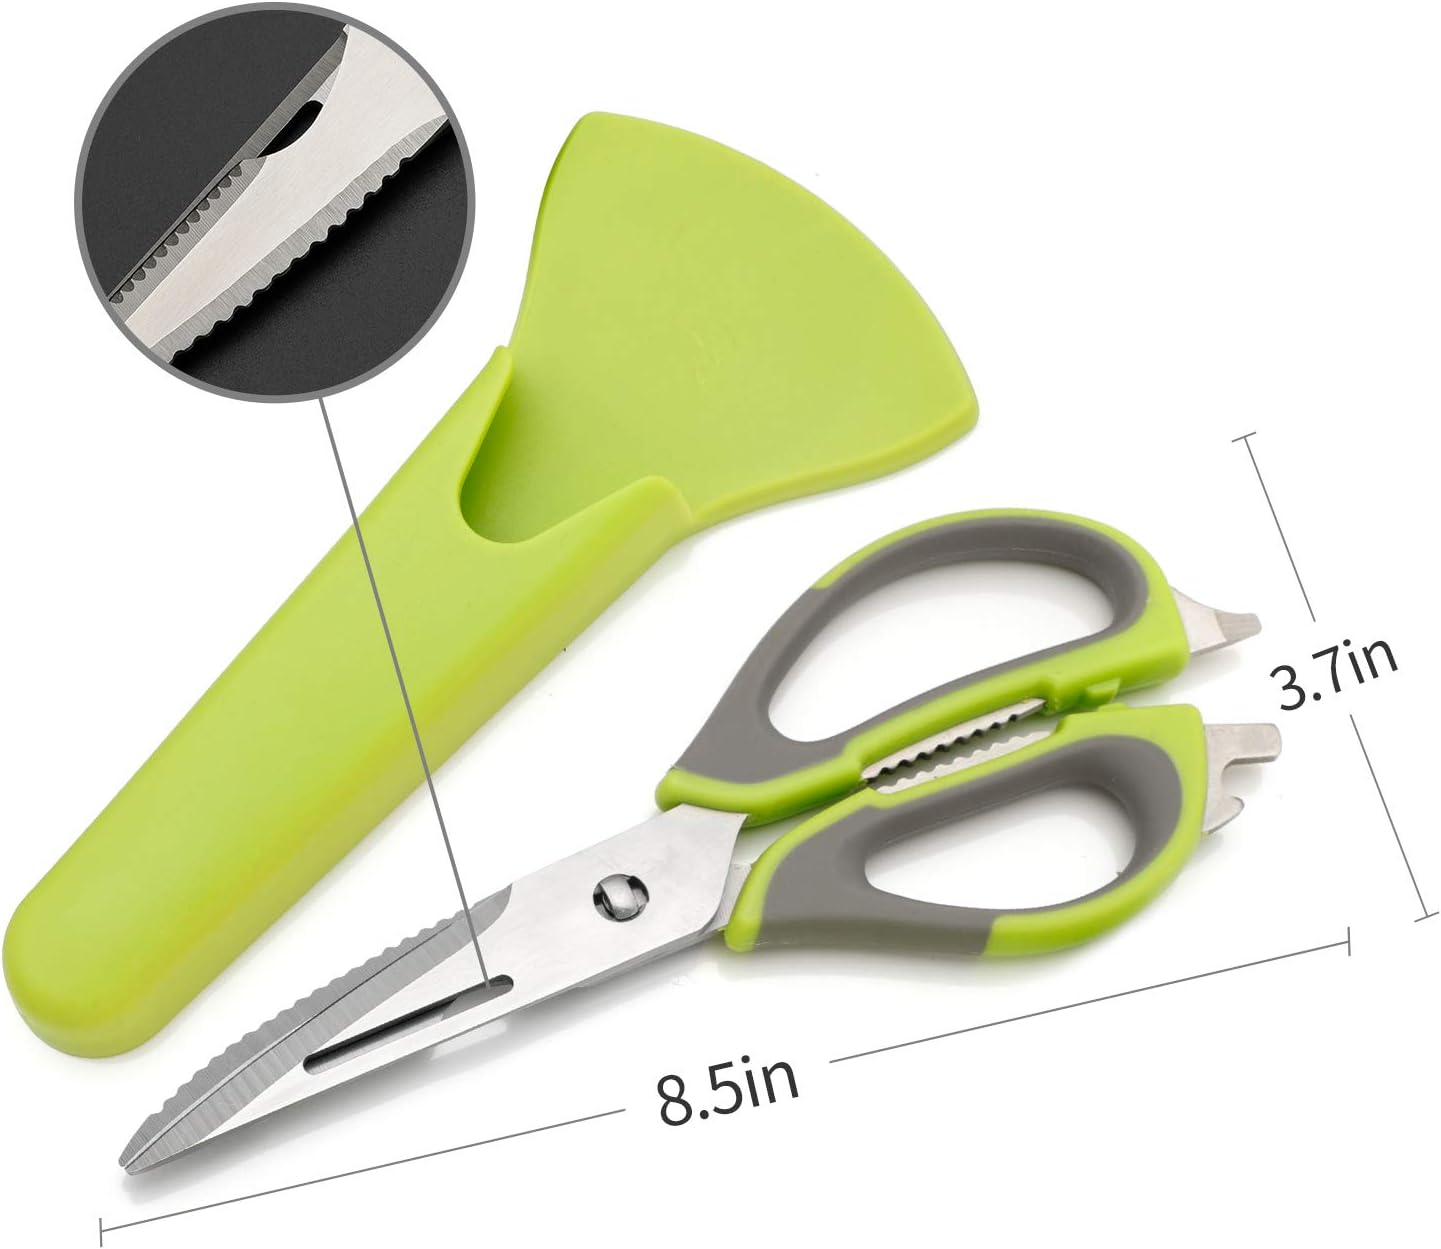 ODMILY Kitchen Scissors Review